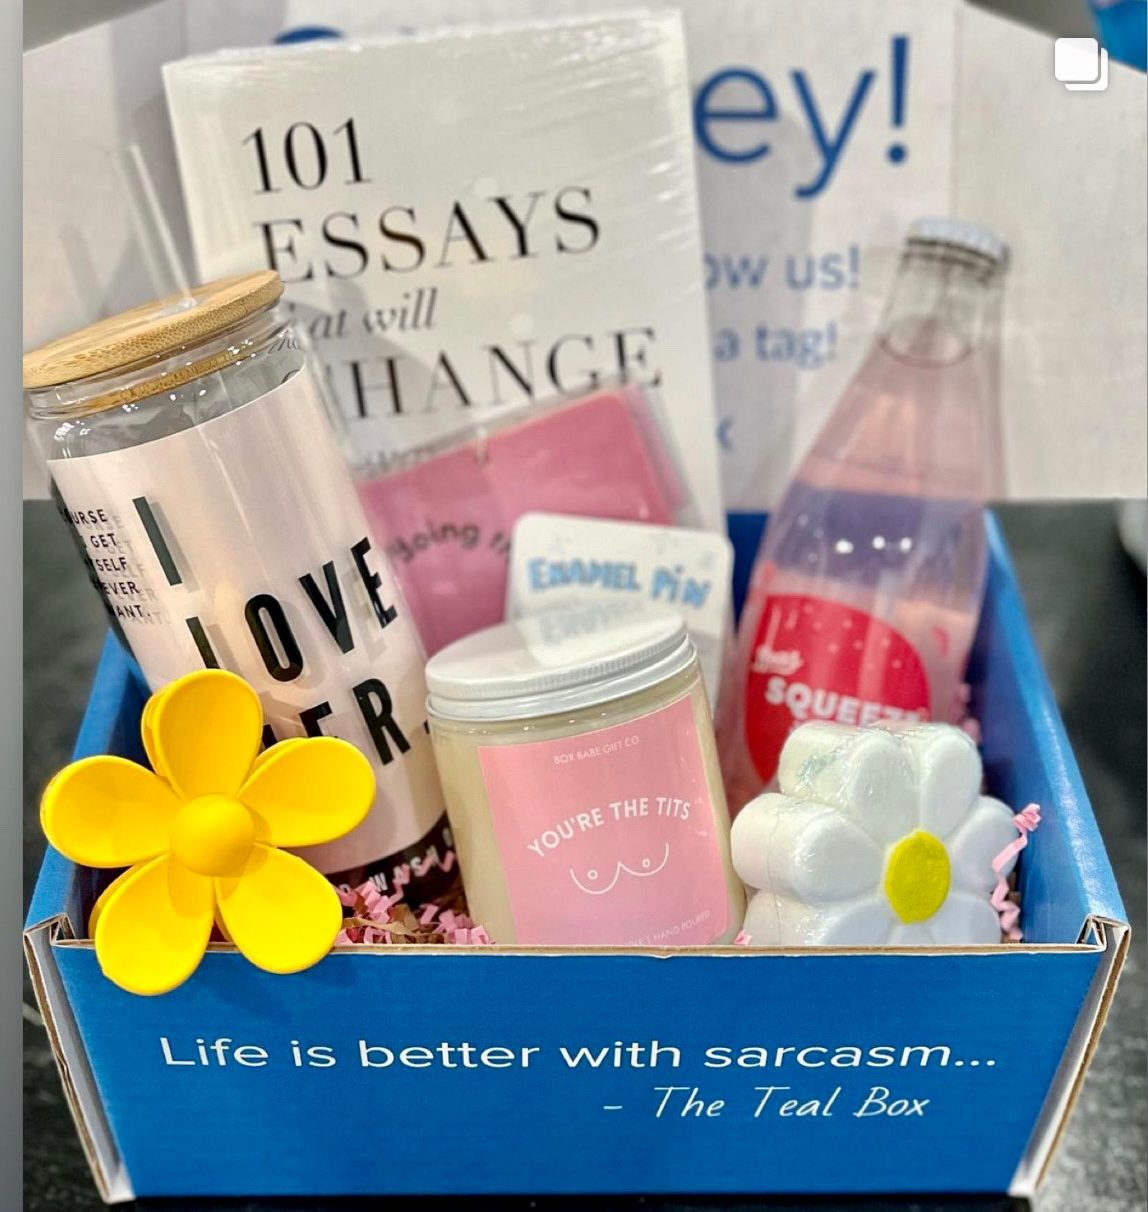 A gift box full of a variety of items that reads: "Life is better with sarcasm. —The Teal Box"